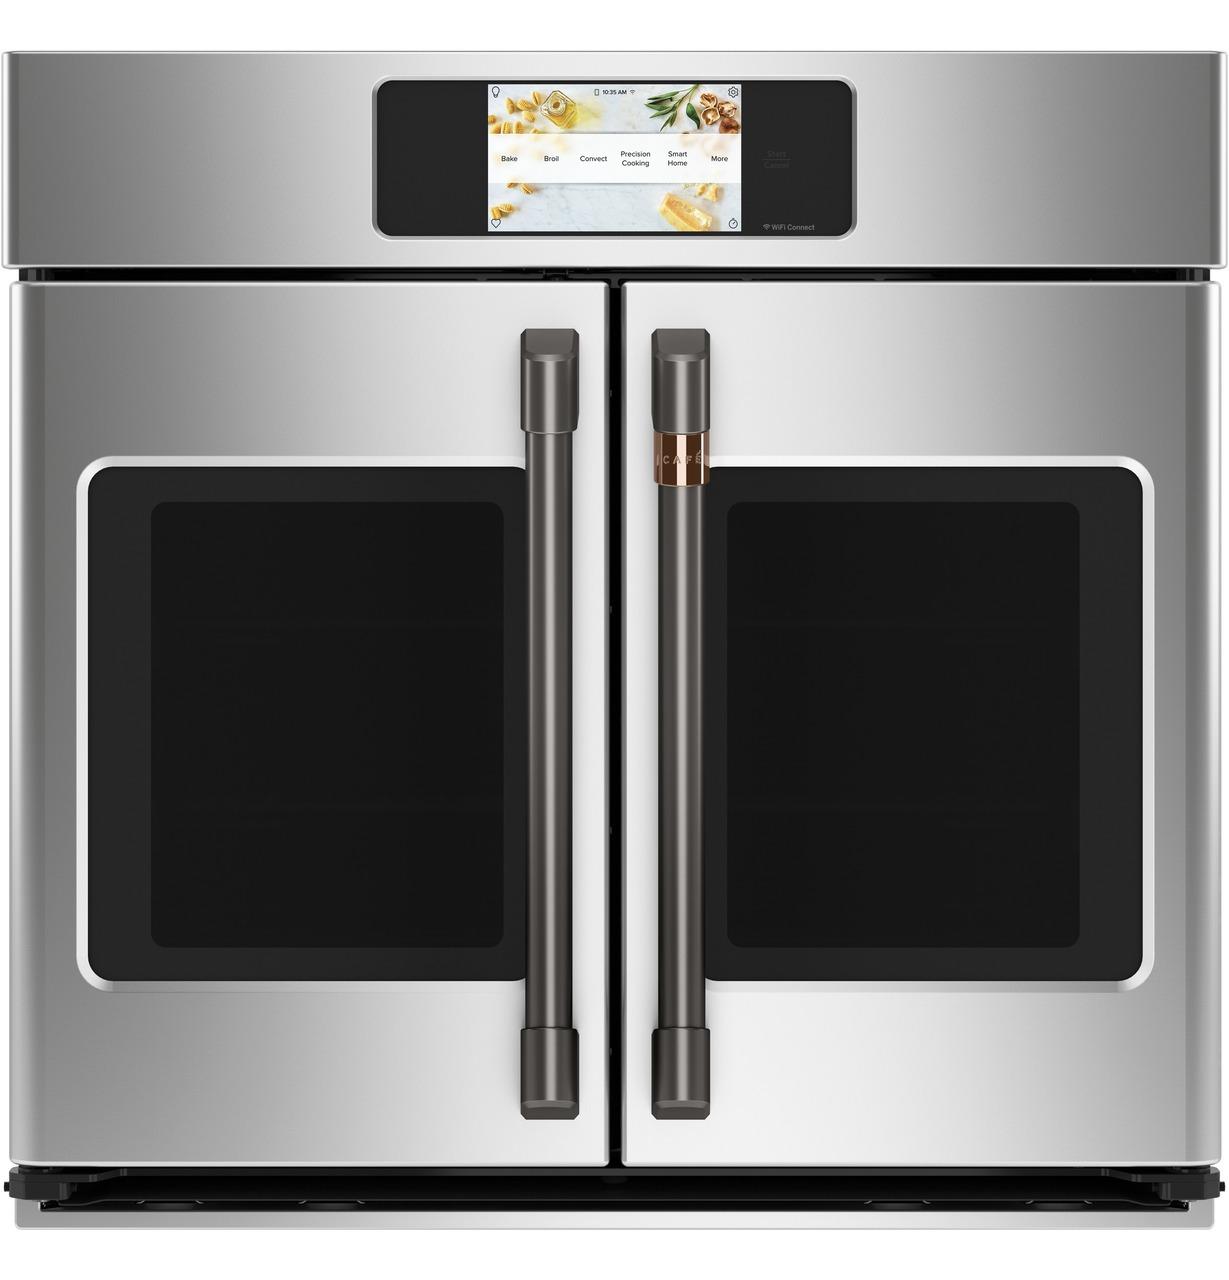 Cafe Caf(eback)™ Professional Series 30" Smart Built-In Convection French-Door Single Wall Oven